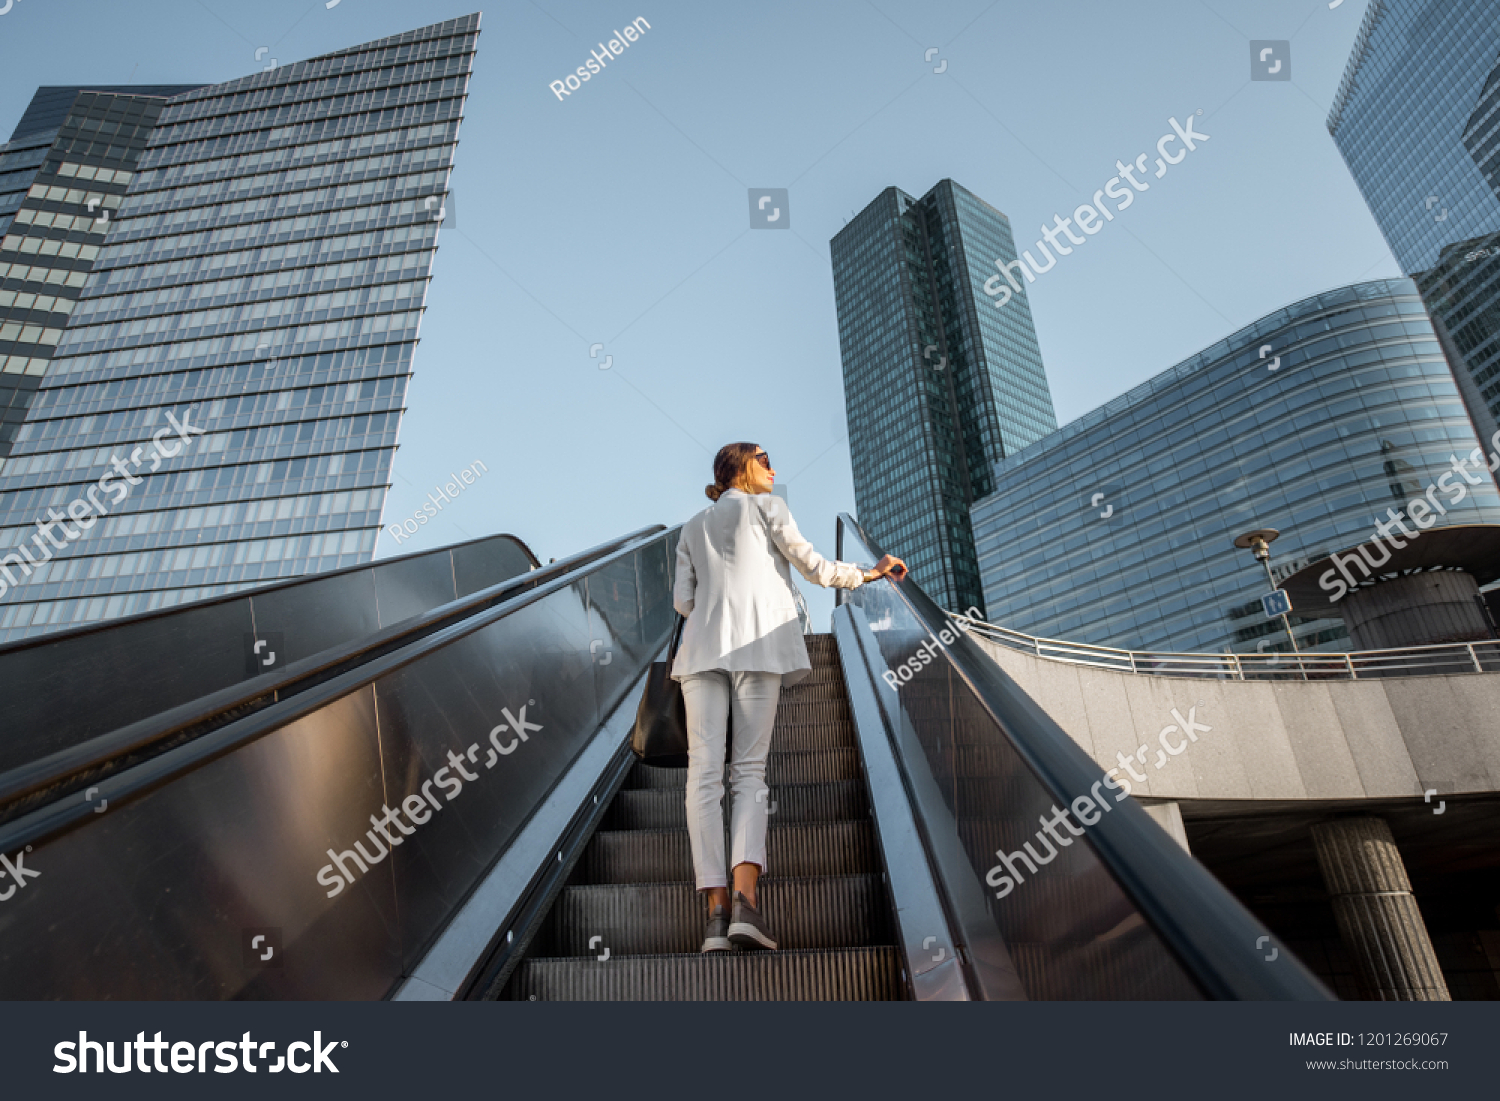 Stylish businesswoman in white suit going up on the escalator at the business centre outdoors with skyscrapers on the background in Paris #1201269067